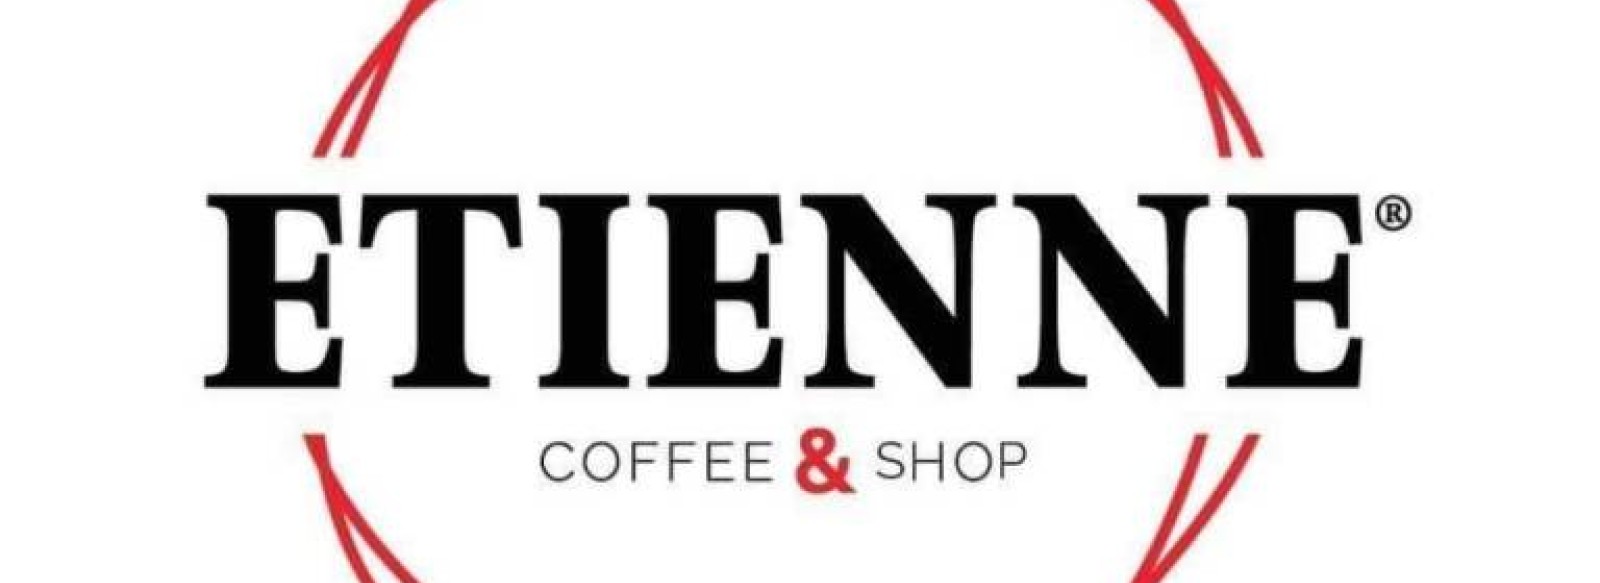 ETIENNE COFFEE AND SHOP